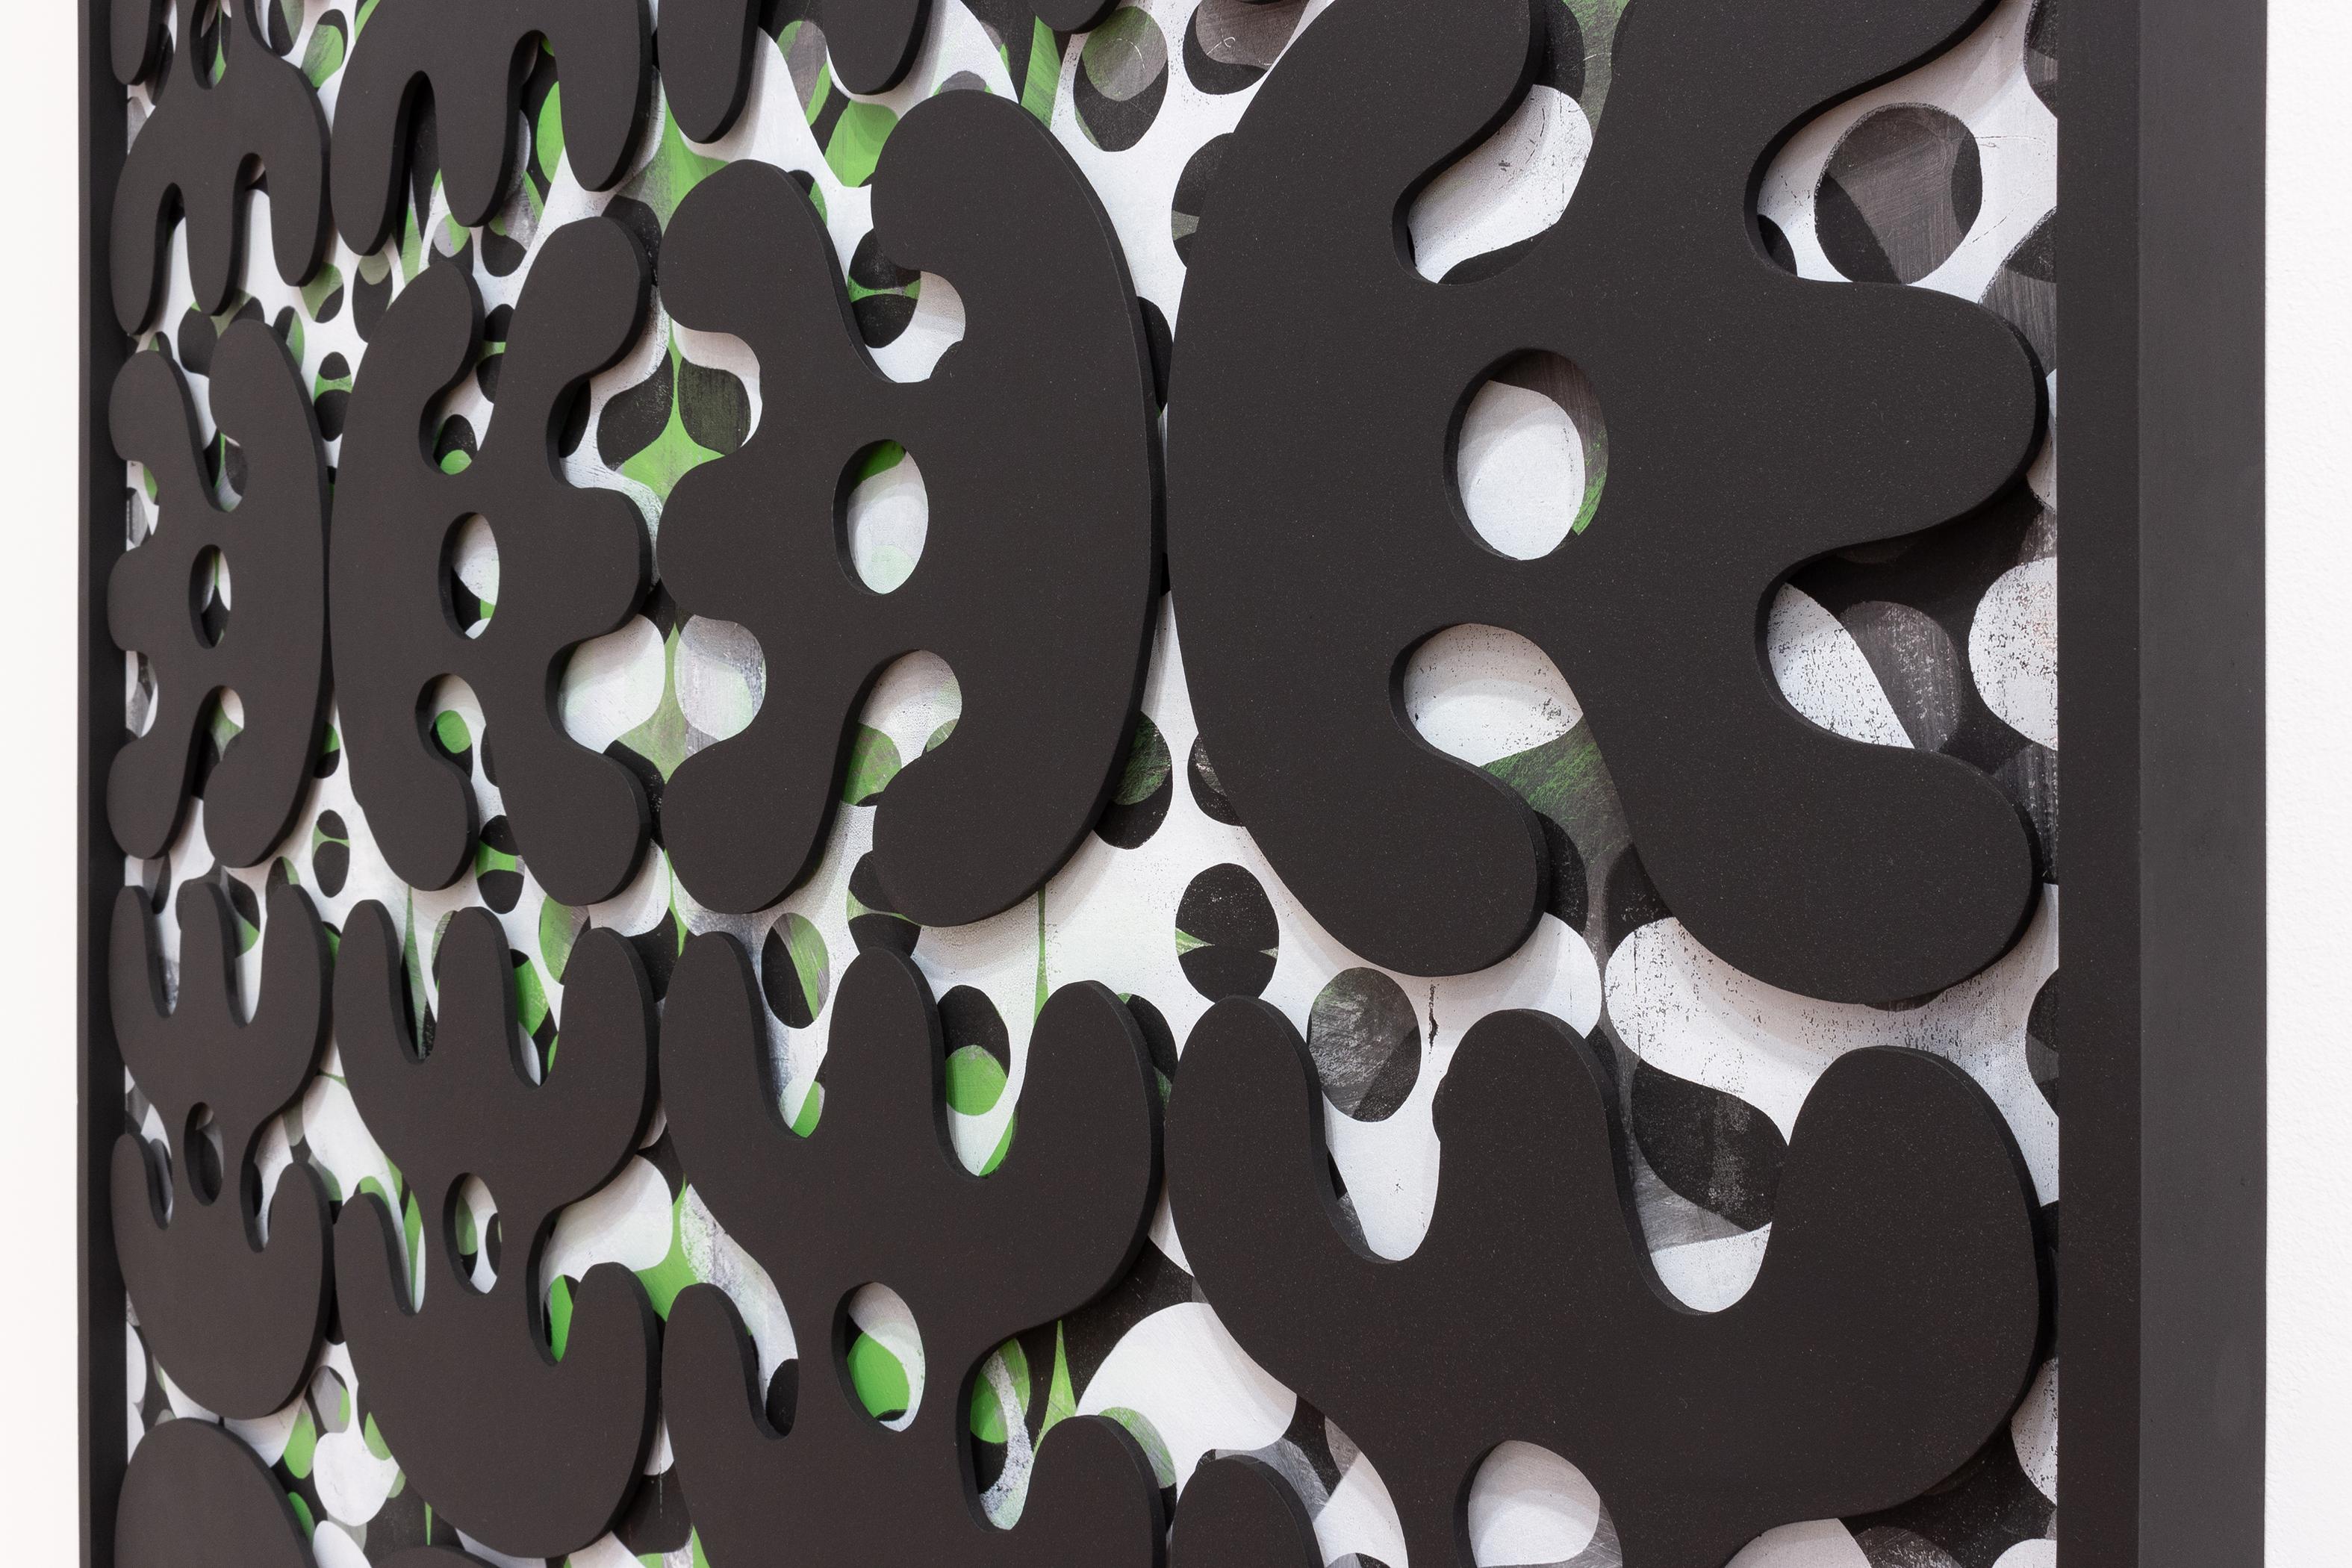 'Single Shape System' large-scale abstract, modern, black, white, green, symbols - Sculpture by Esteban Patino